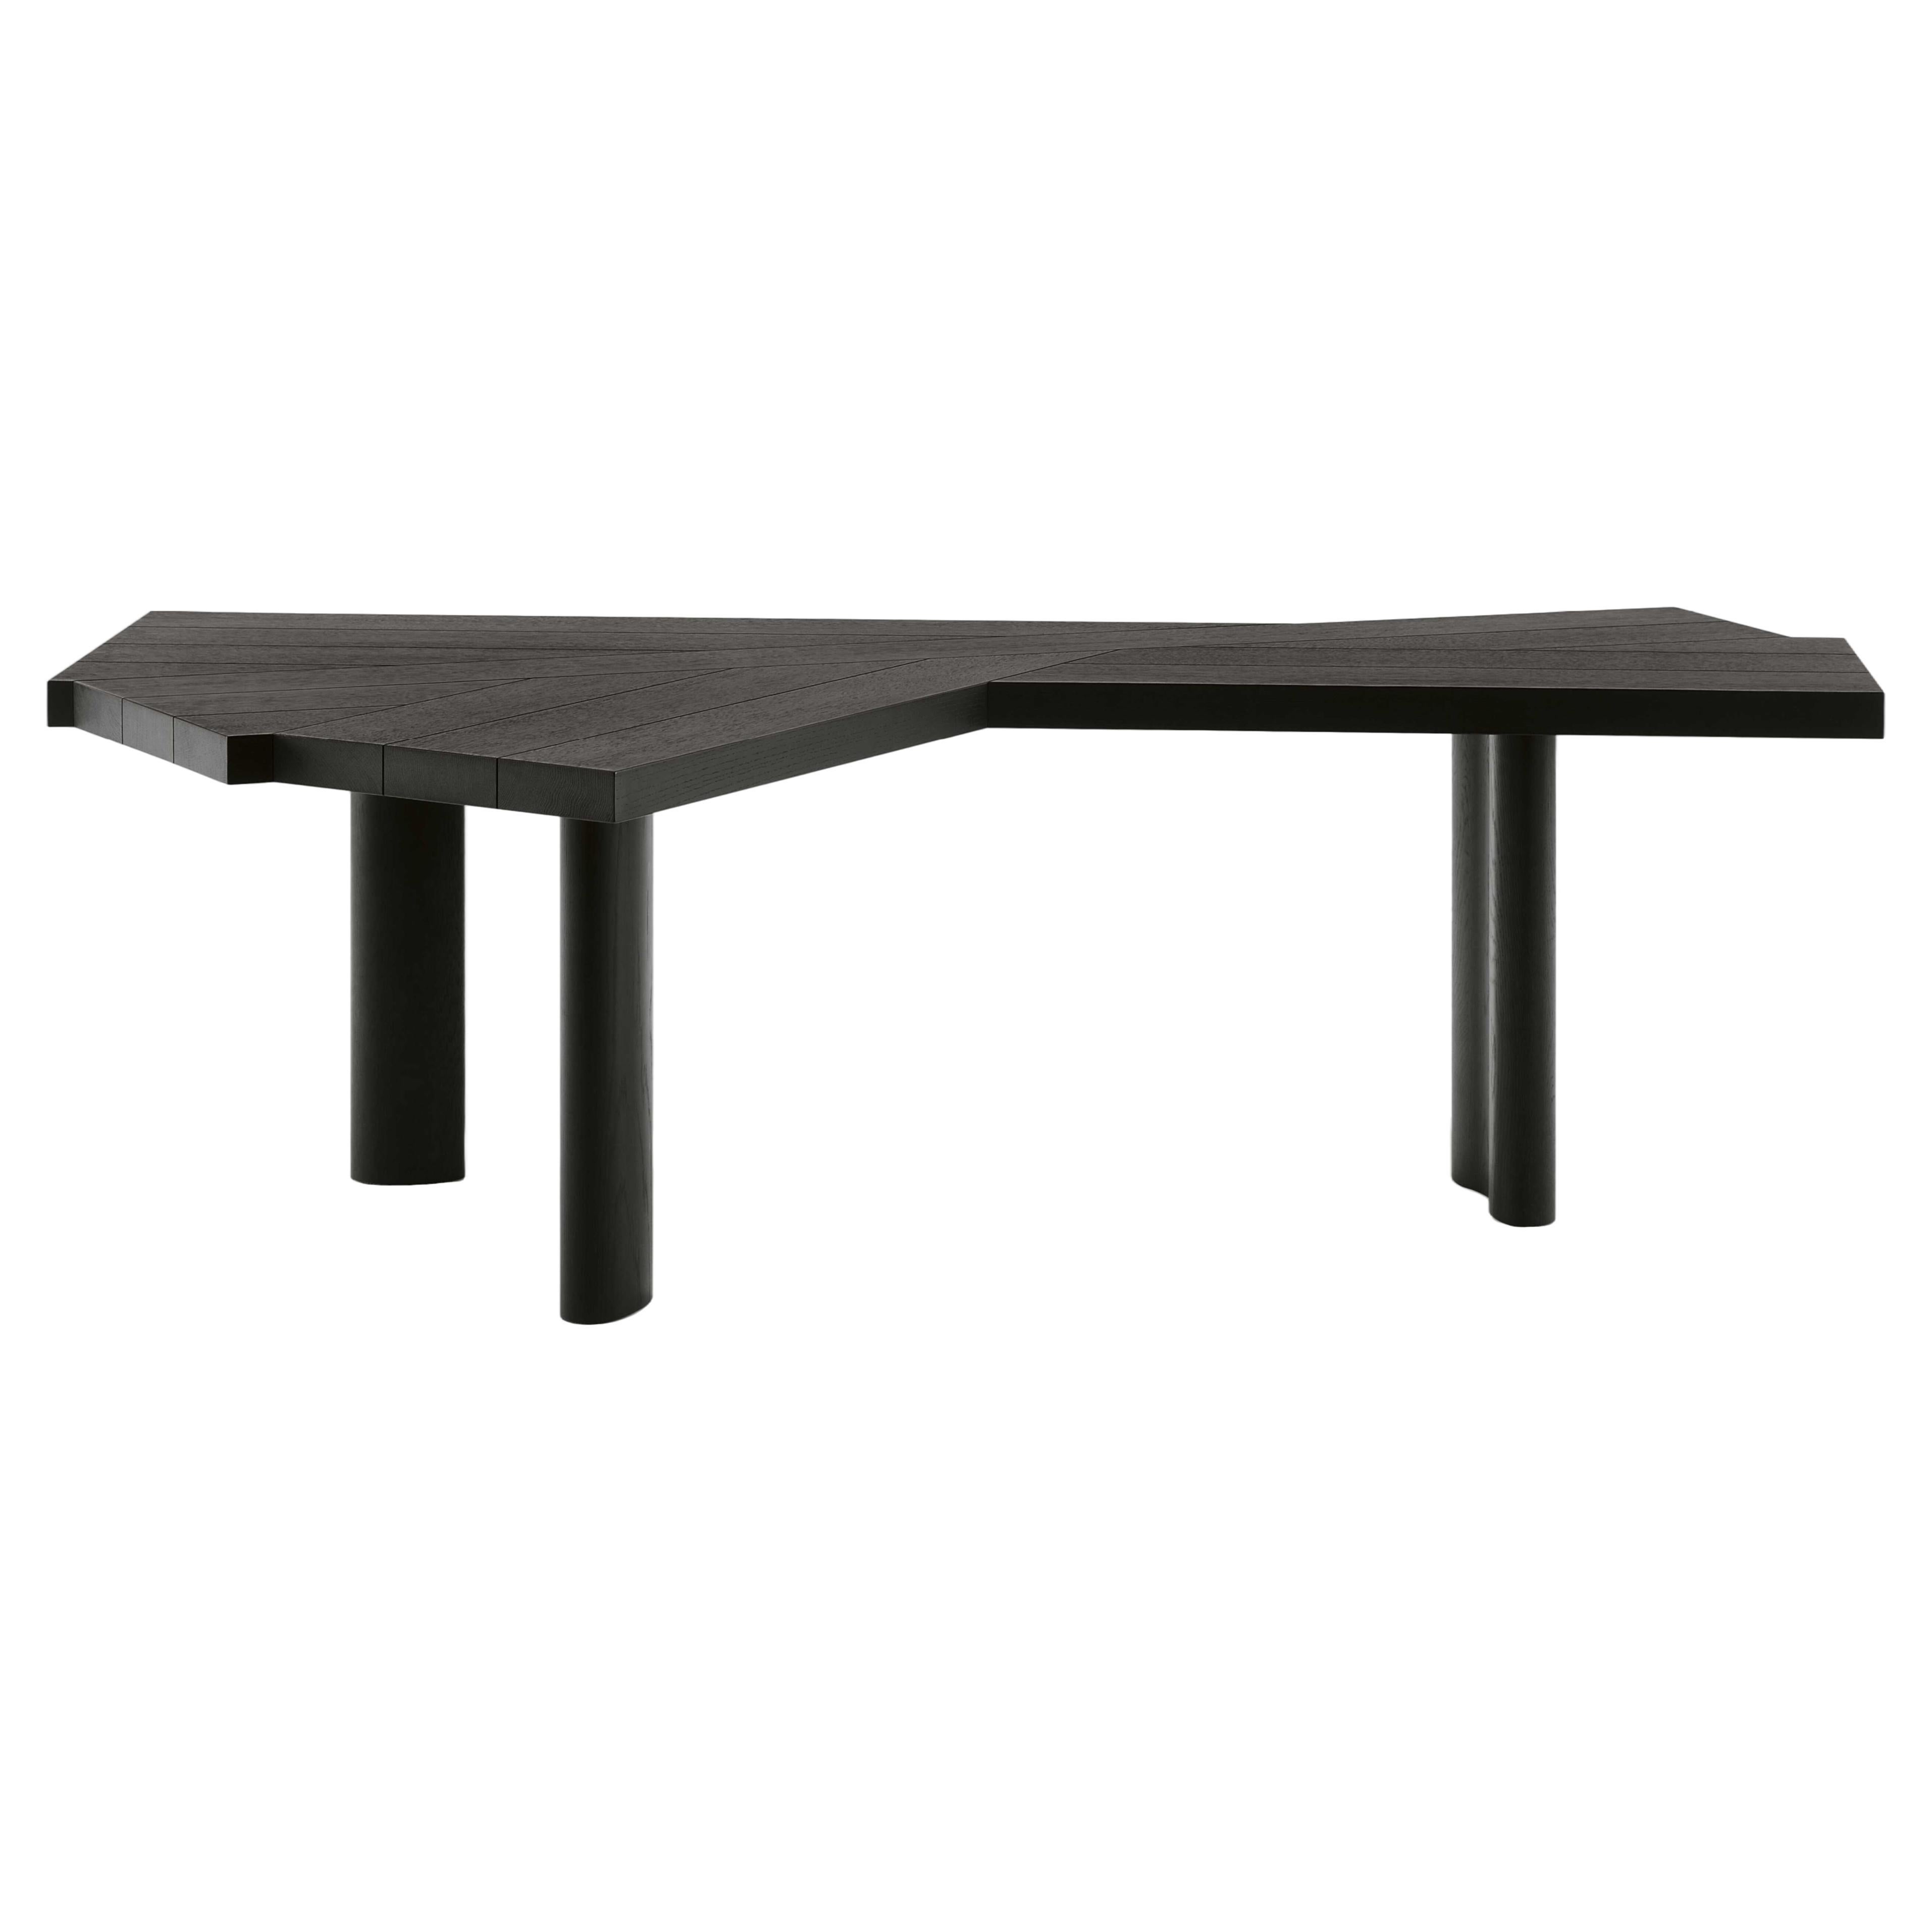 Charlotte Perriand Ventaglio Sculptural Desk or Dining Table for Cassina, new For Sale